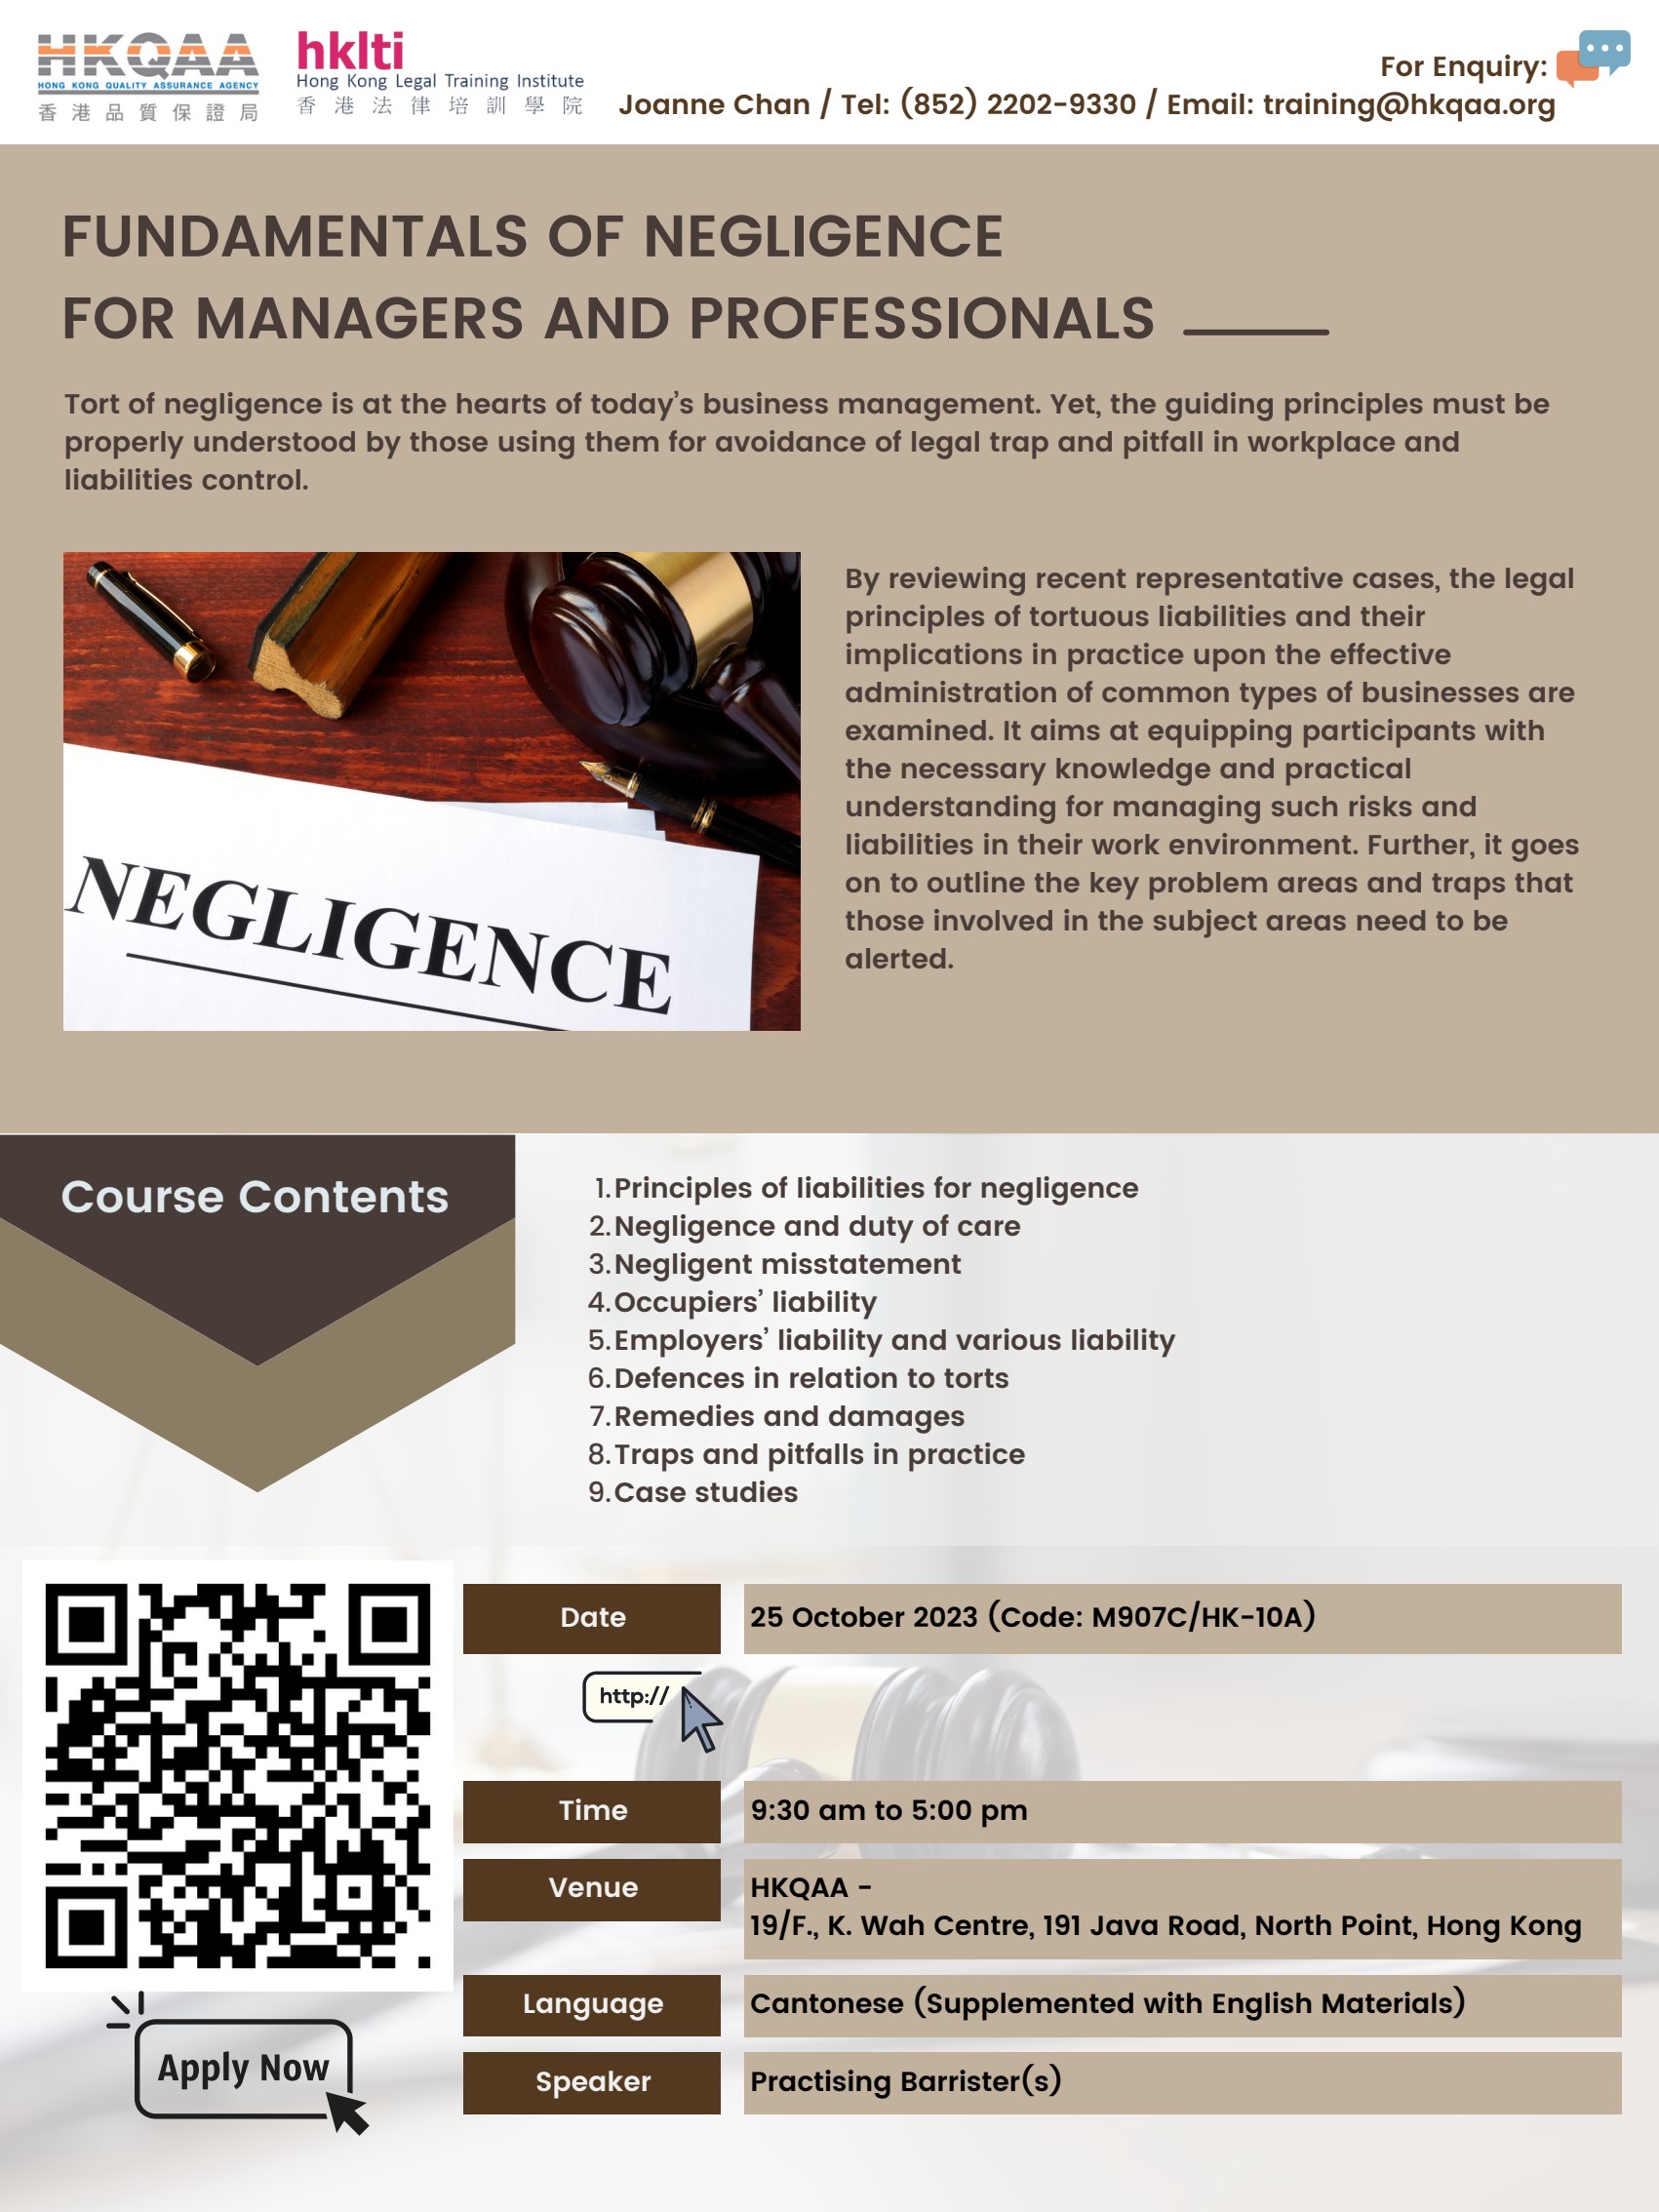 20231025 Fundamentals of Negligence for Managers and Professionals